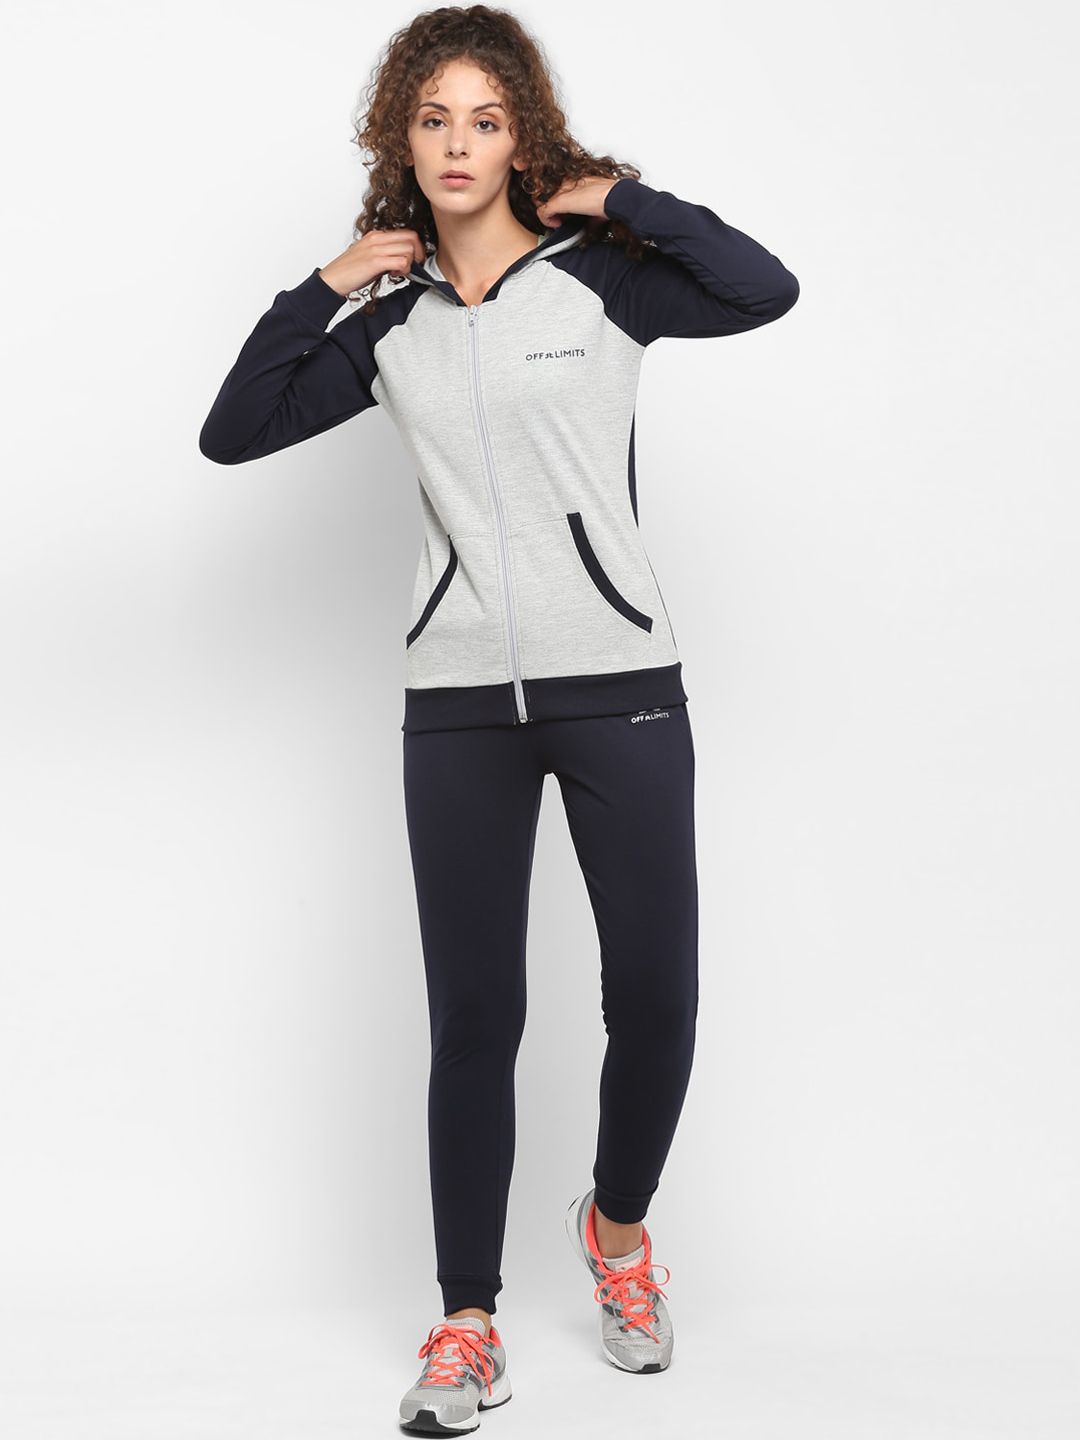 OFF LIMITS Women Navy Blue & Grey Colourblocked Tracksuit Price in India